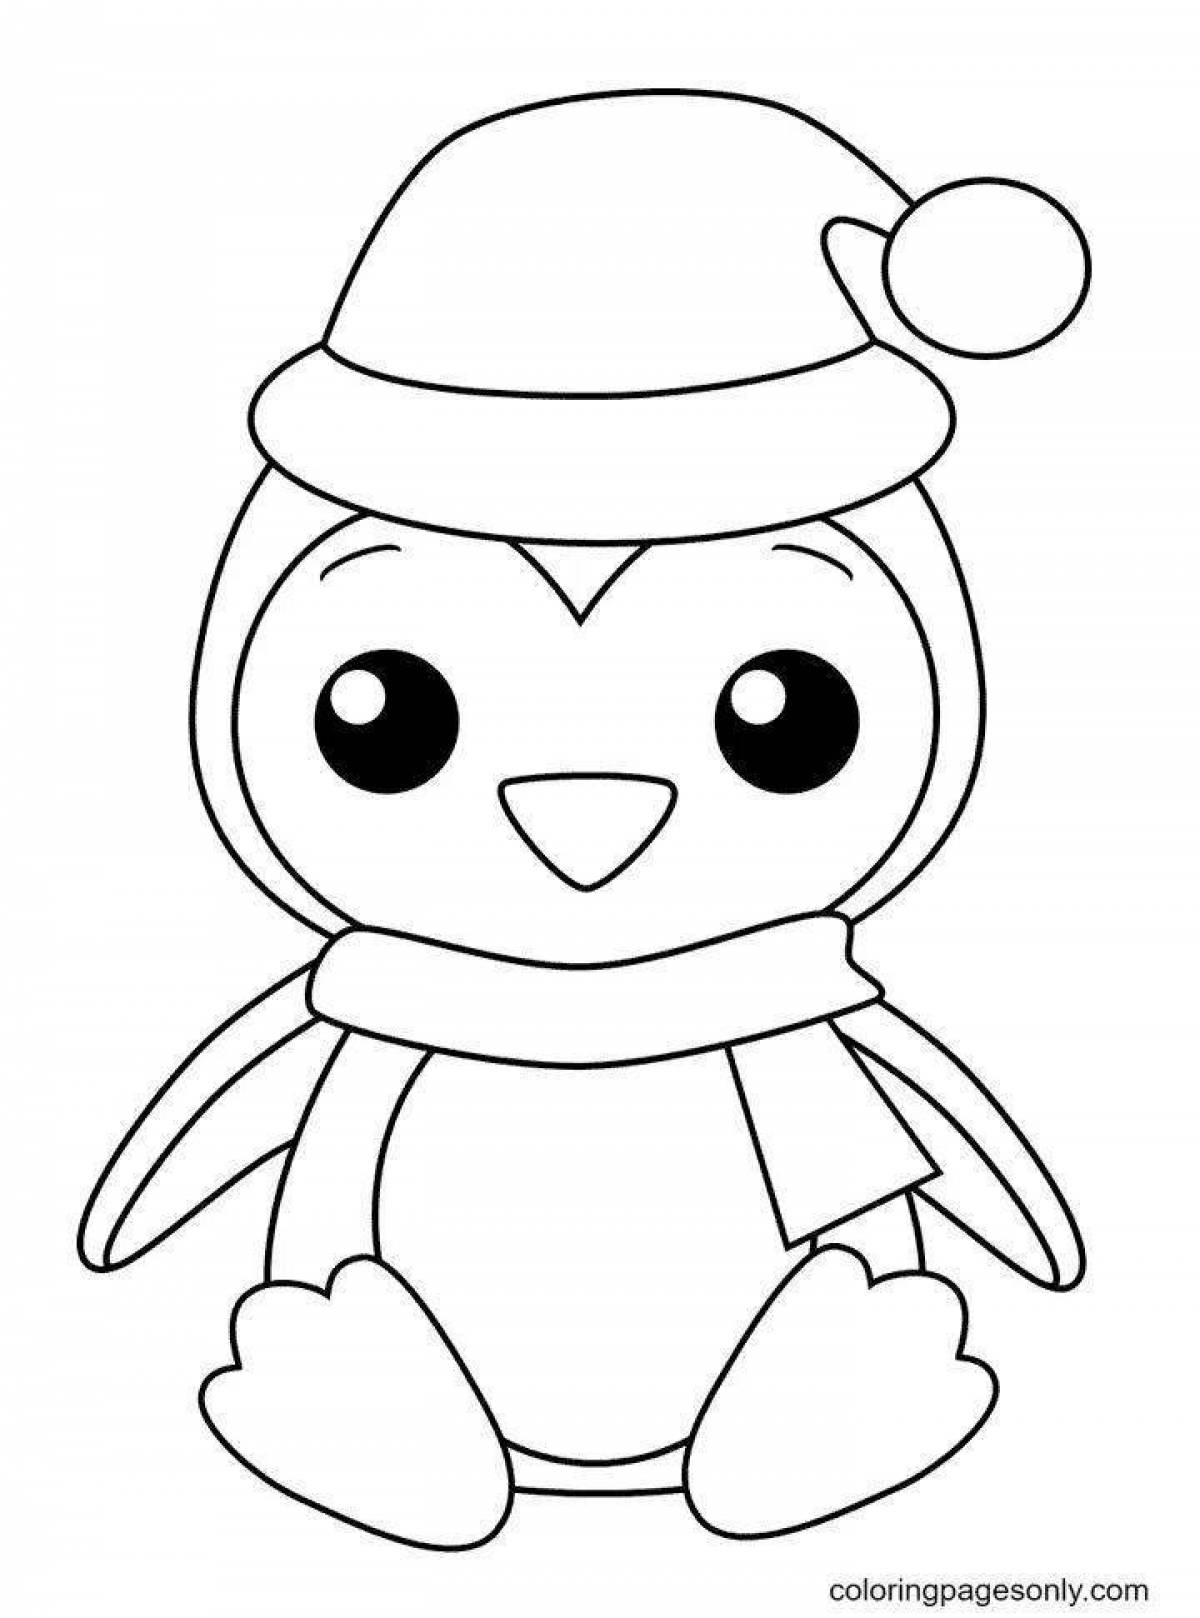 Chubby penguin coloring page